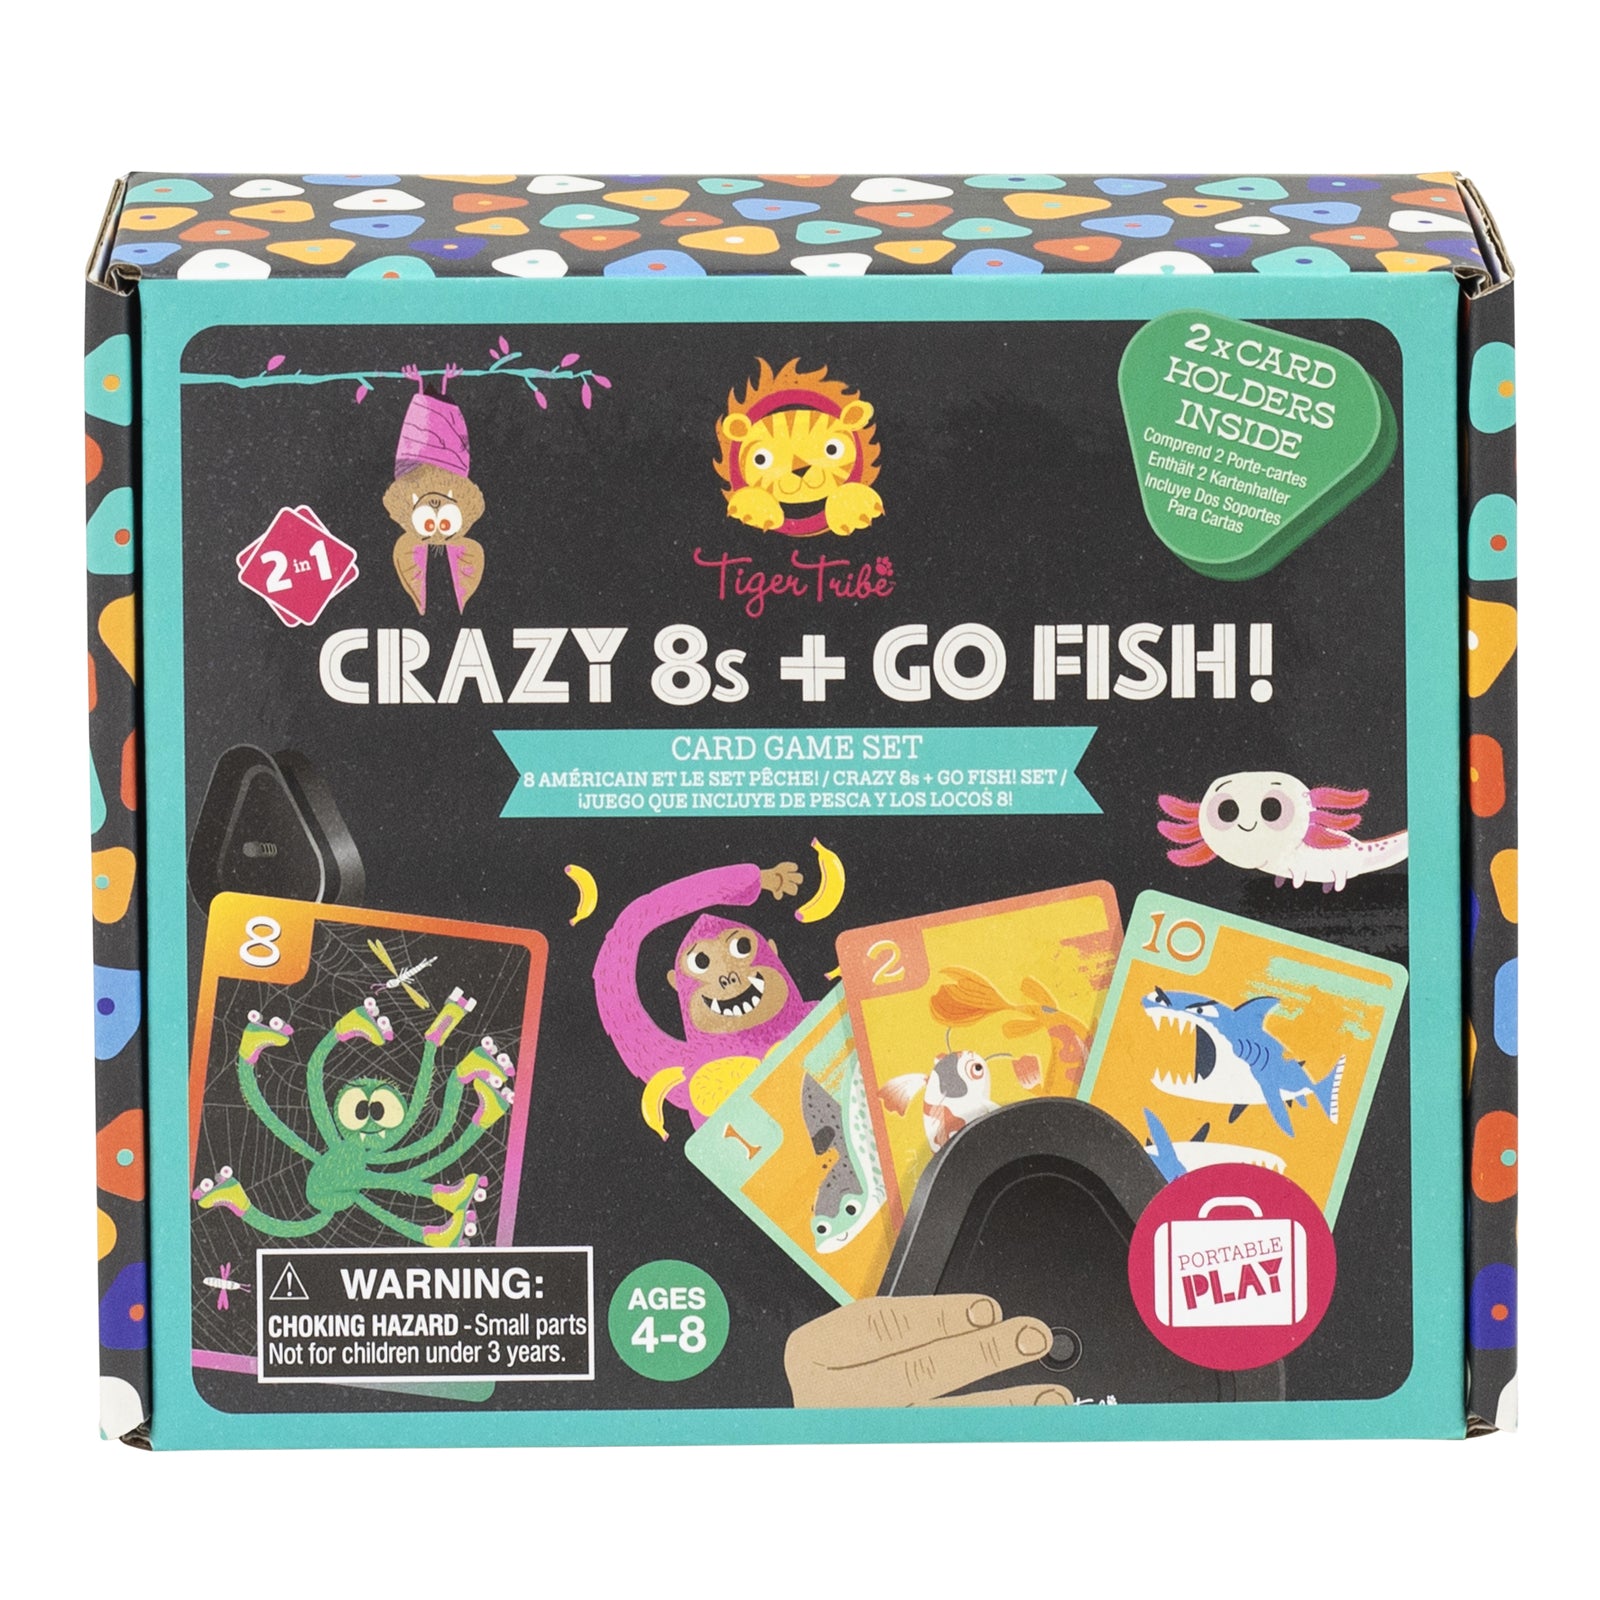 TIGER TRIBE - CRAZY 8 + GO FISH CARD GAME